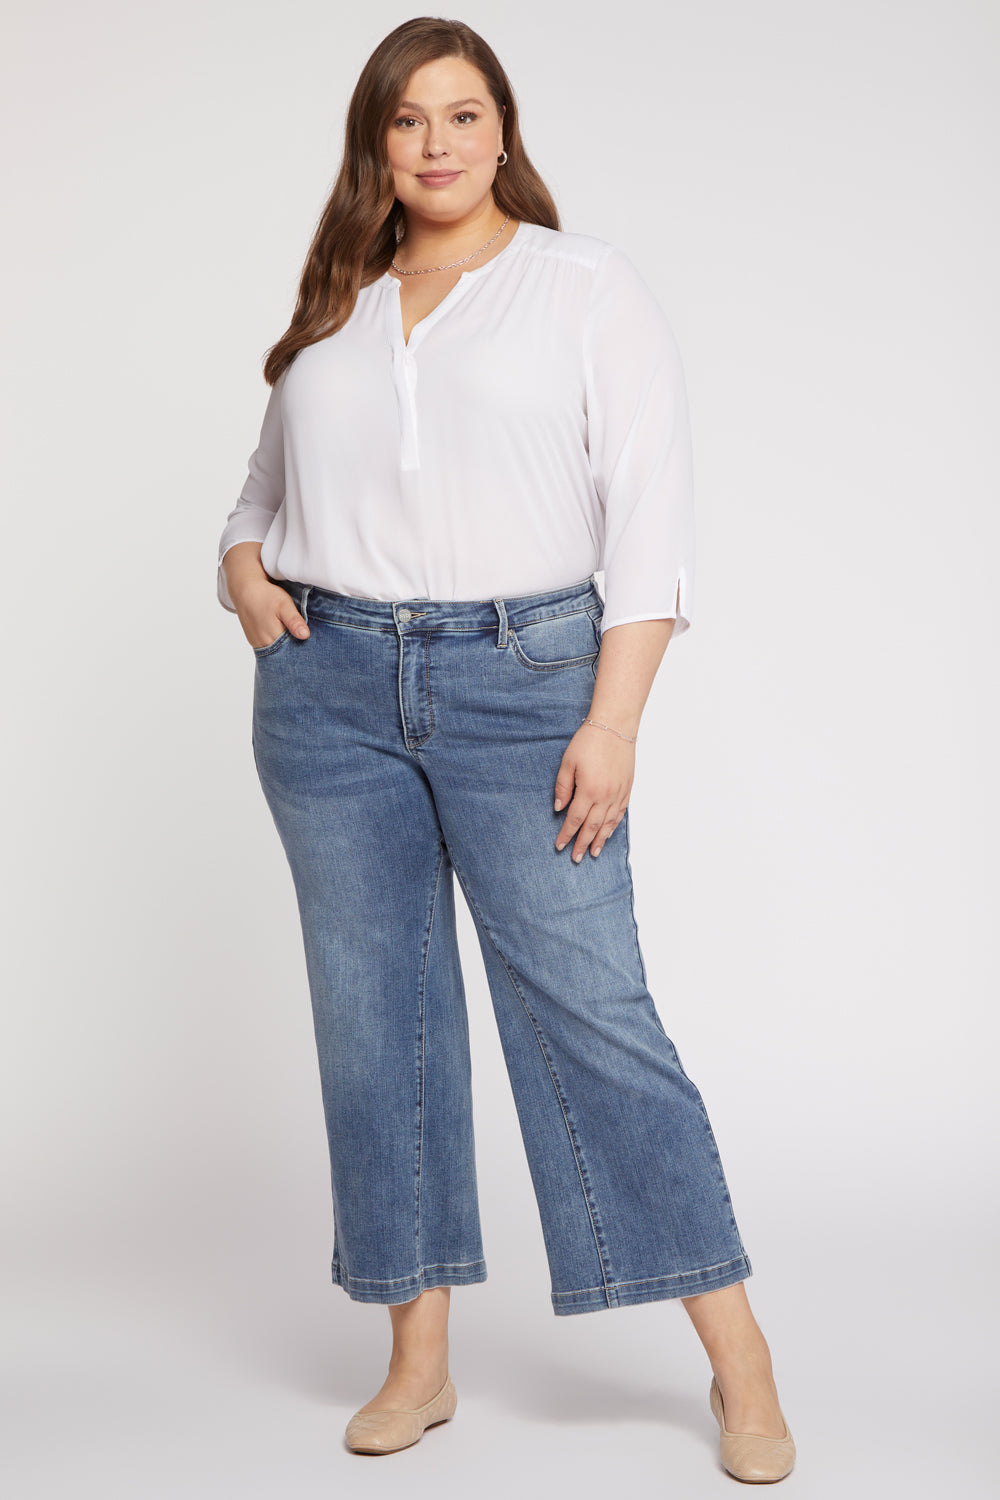 NYDJ Teresa Wide Leg Ankle Jeans In Plus Size With Contoured Inseams - Loire